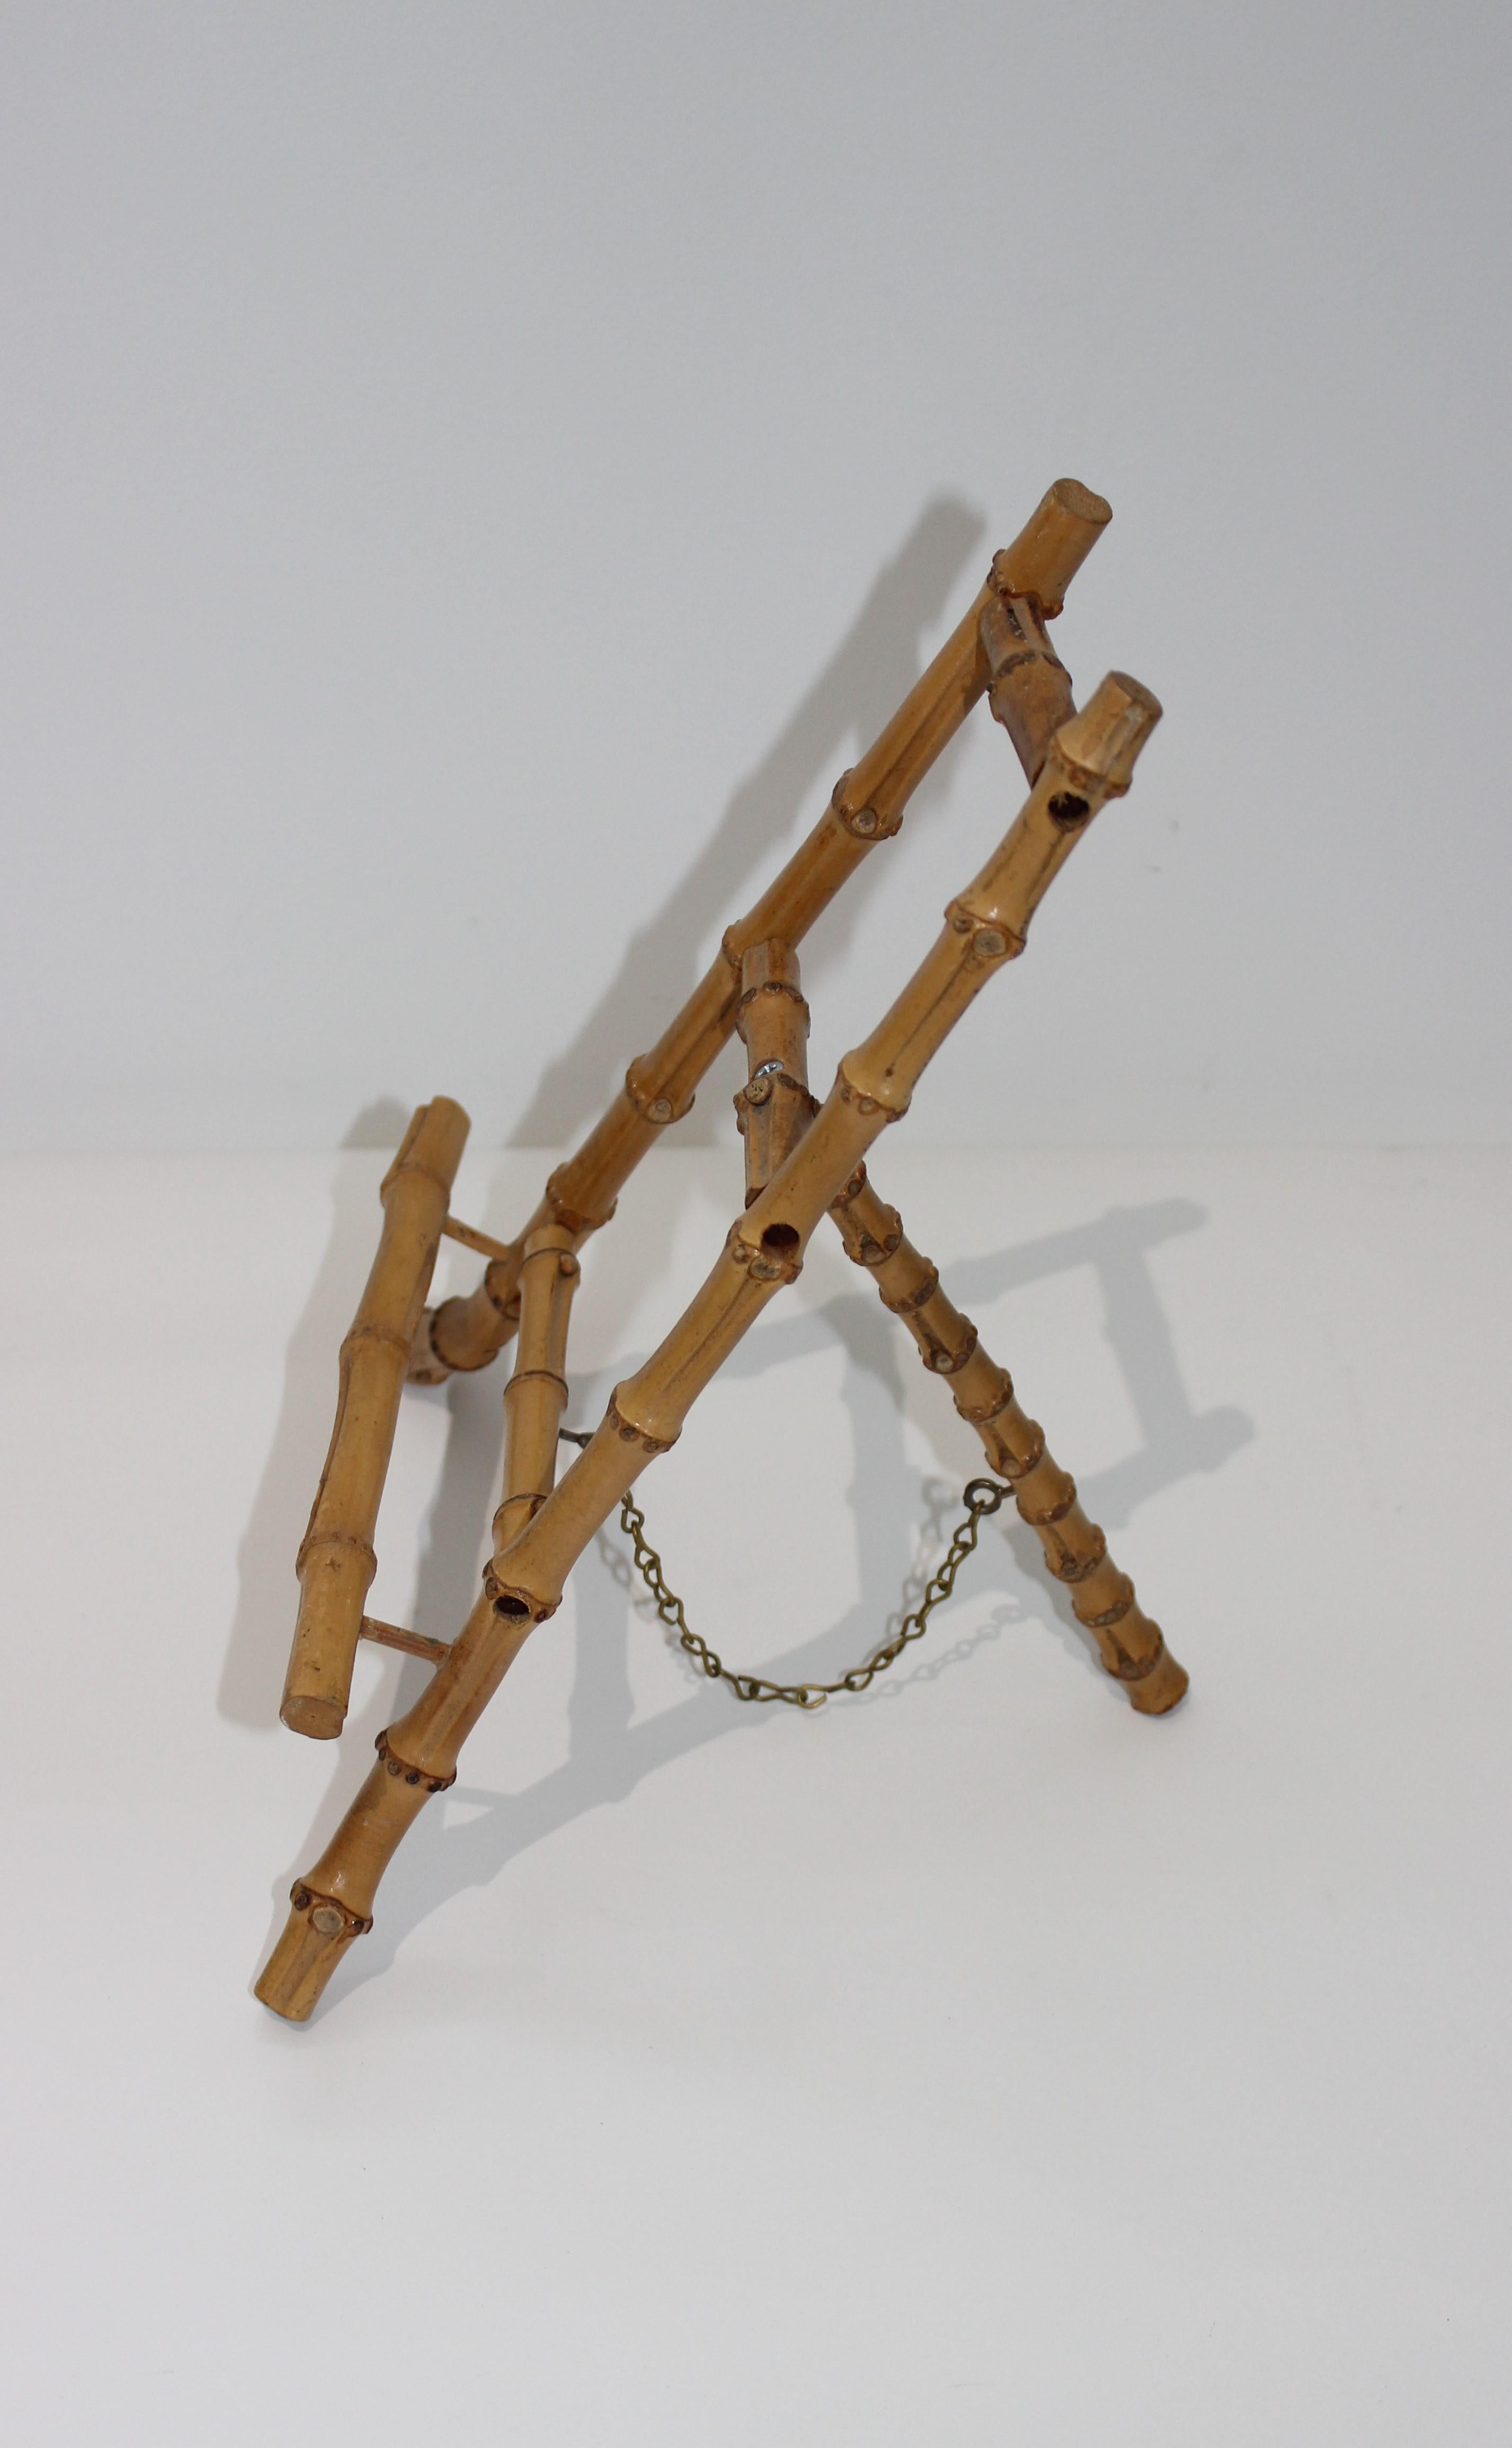 Rustic Bamboo Desk Accessory, Letter Holder Work Papers Easel